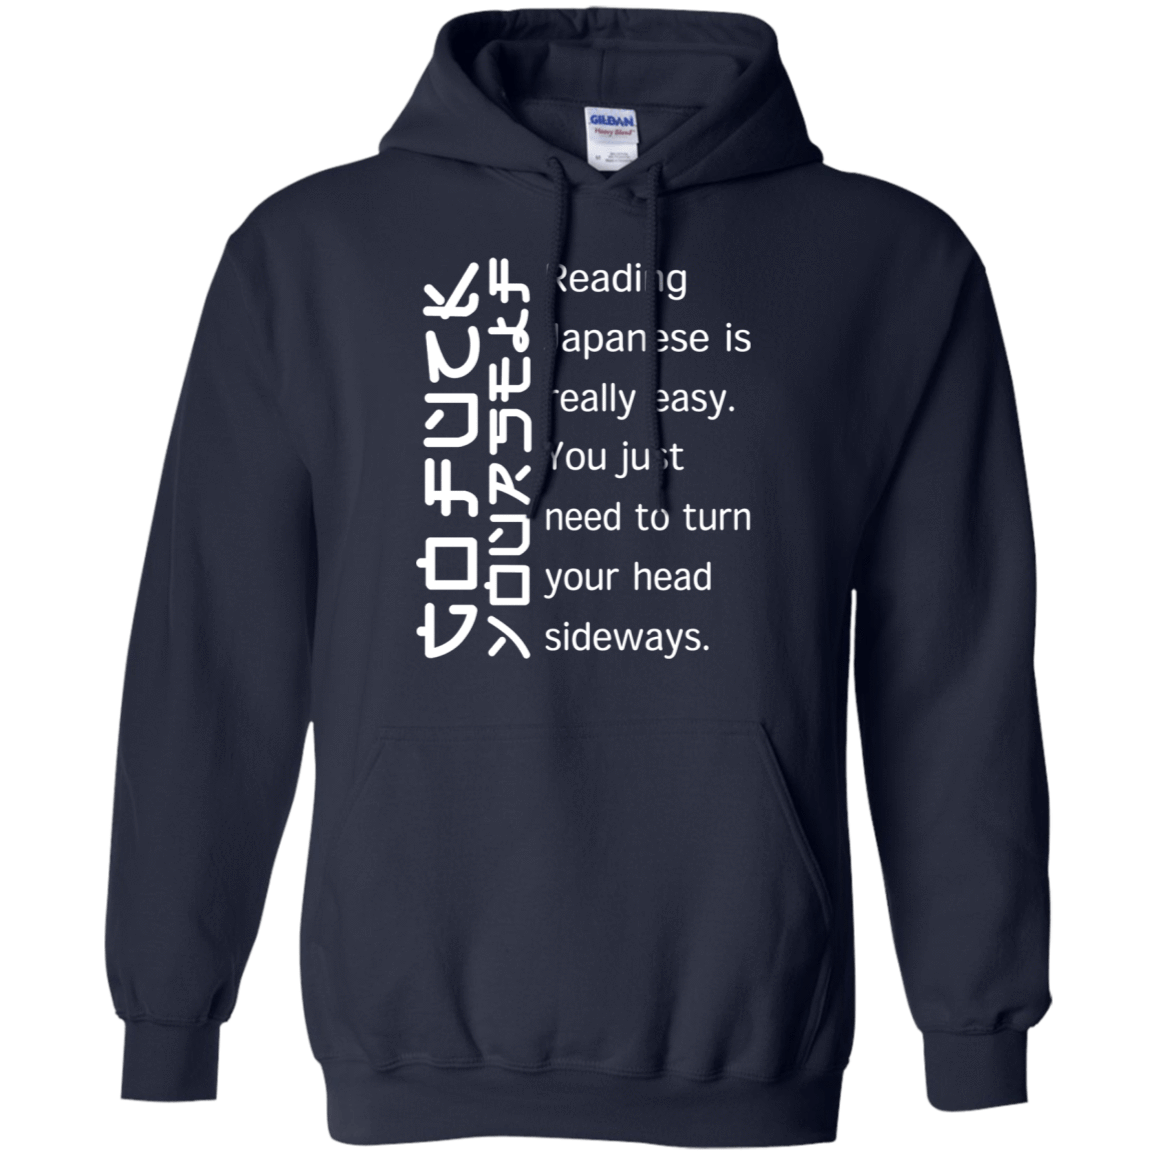 Reading Japanese Is Really Easy T Shirts And Hoodies Tee Ript